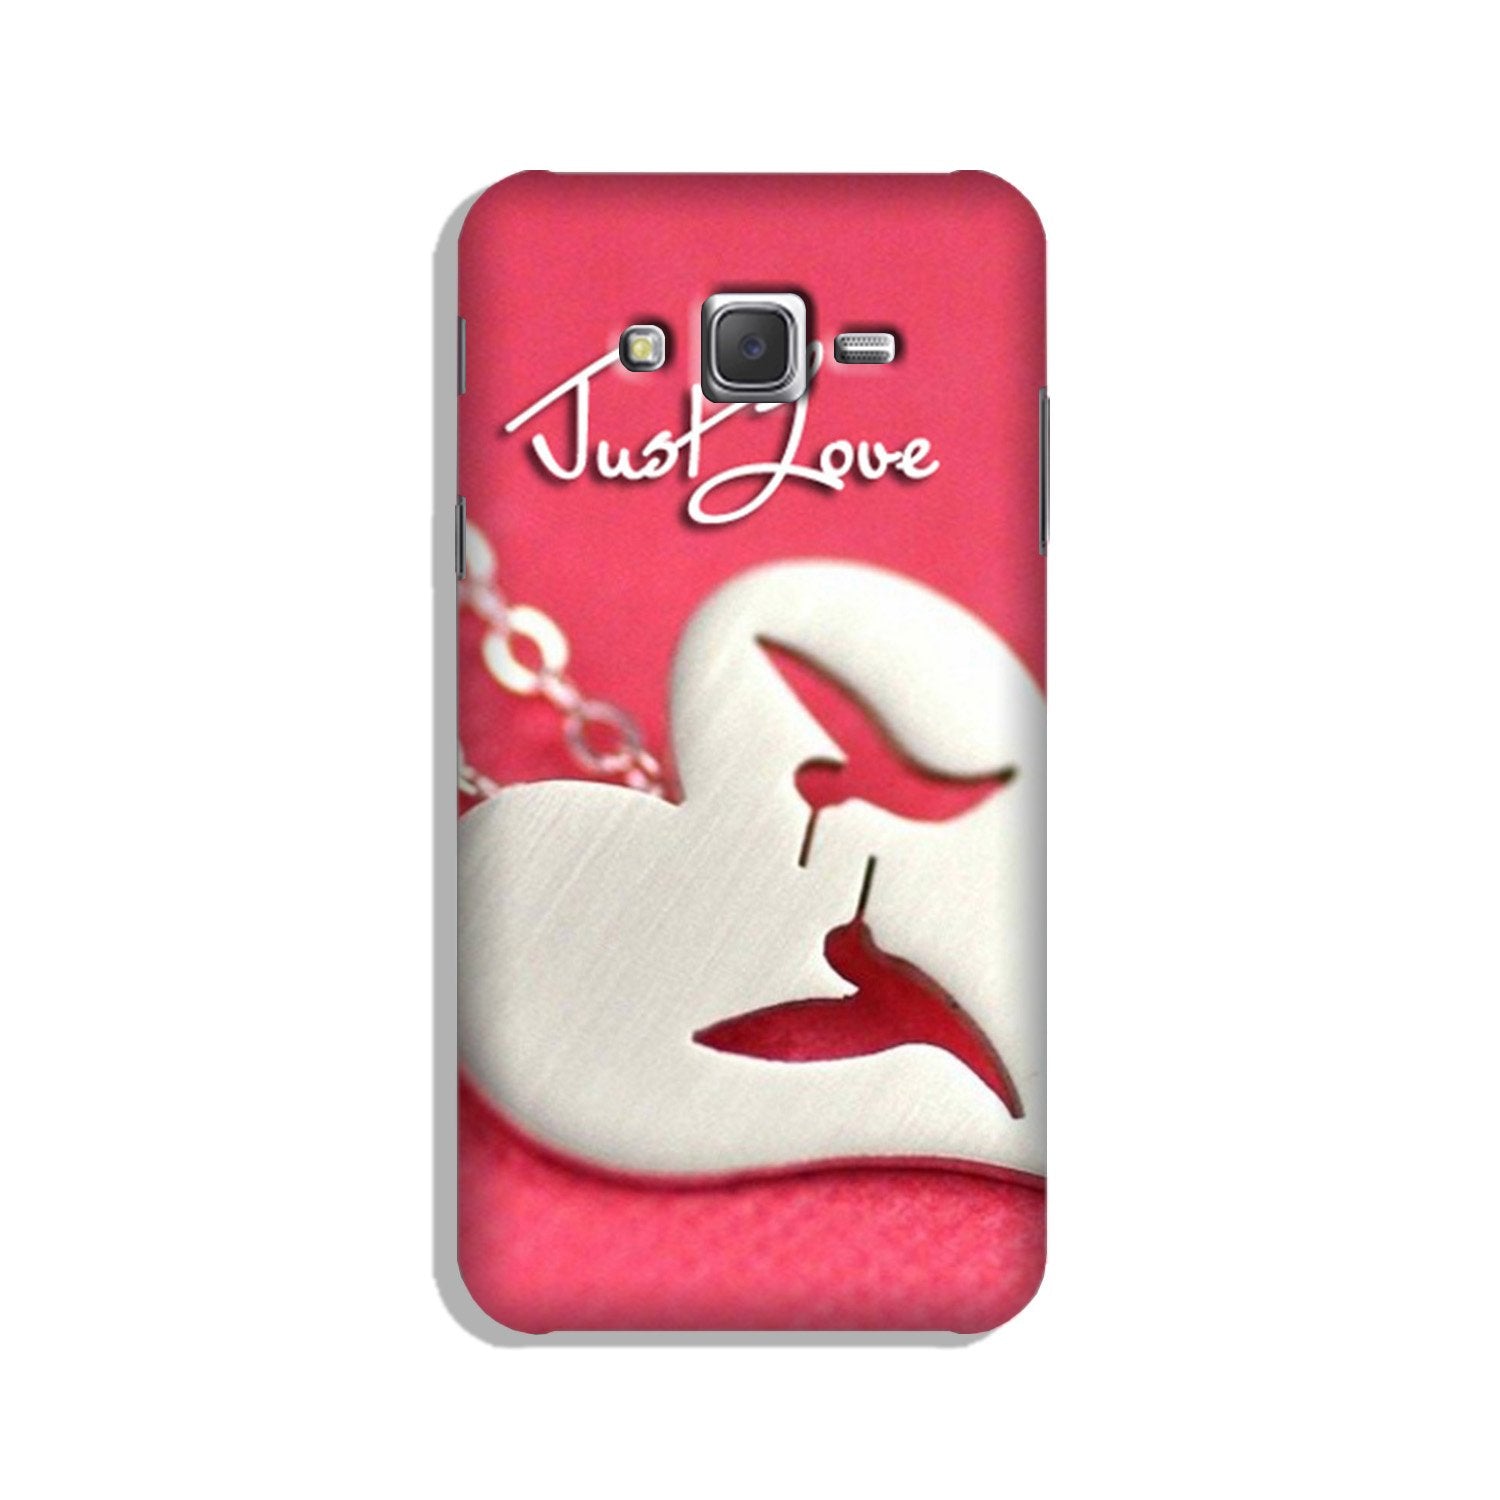 Just love Case for Galaxy J7 (2015)